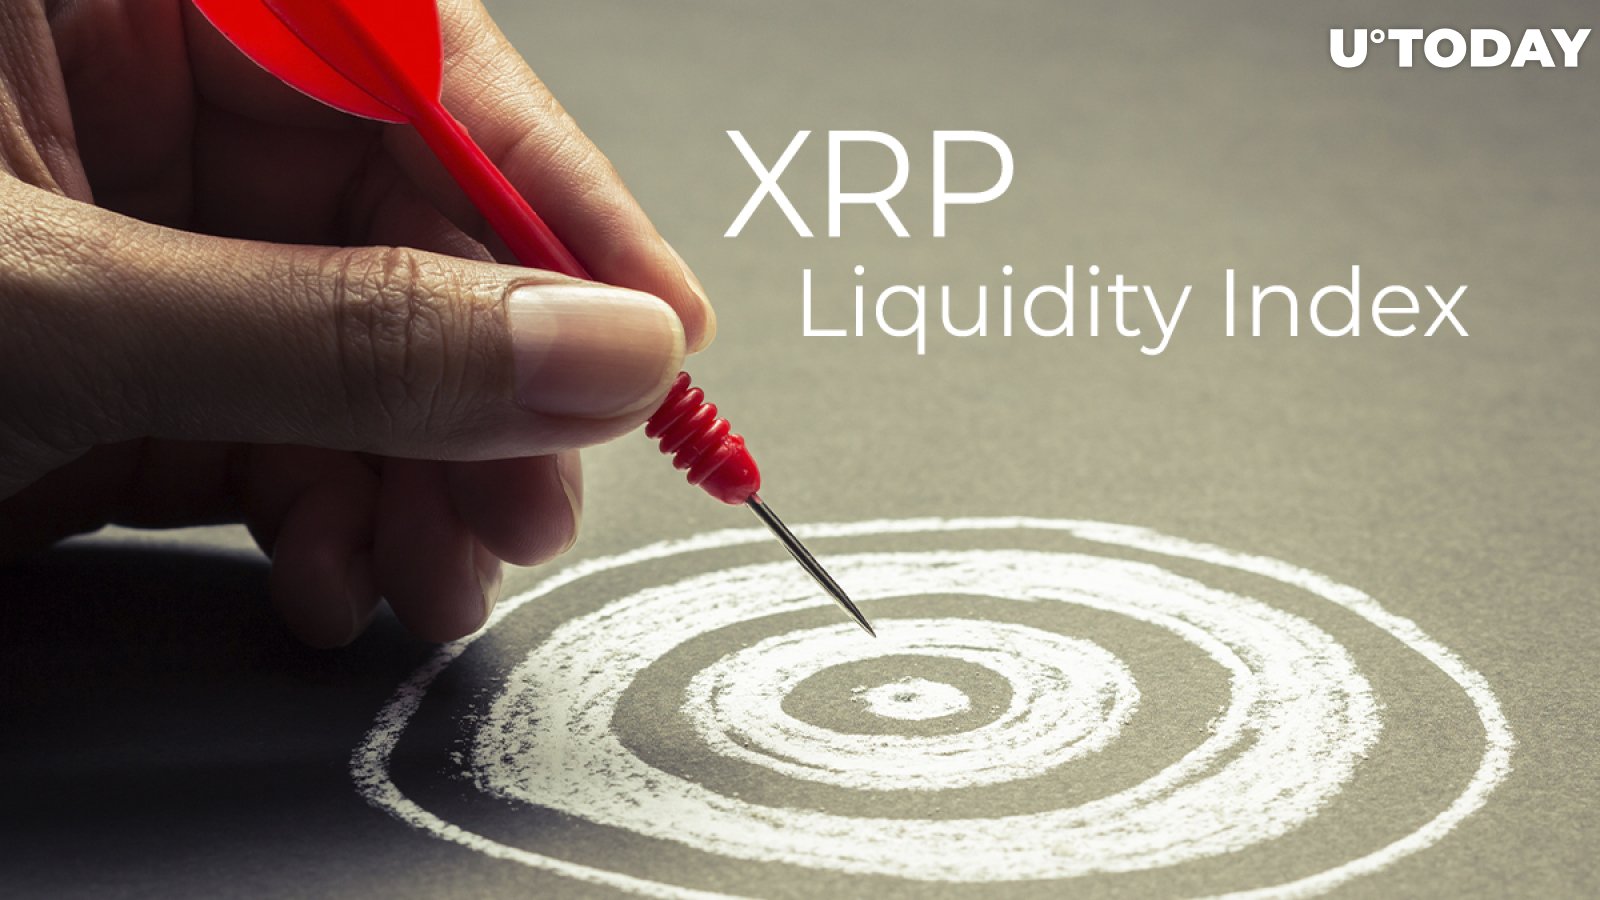 XRP Liquidity Index Hits New All-Time High, 150 mln XRP Anonymous Transfer Detected by Whale Alert